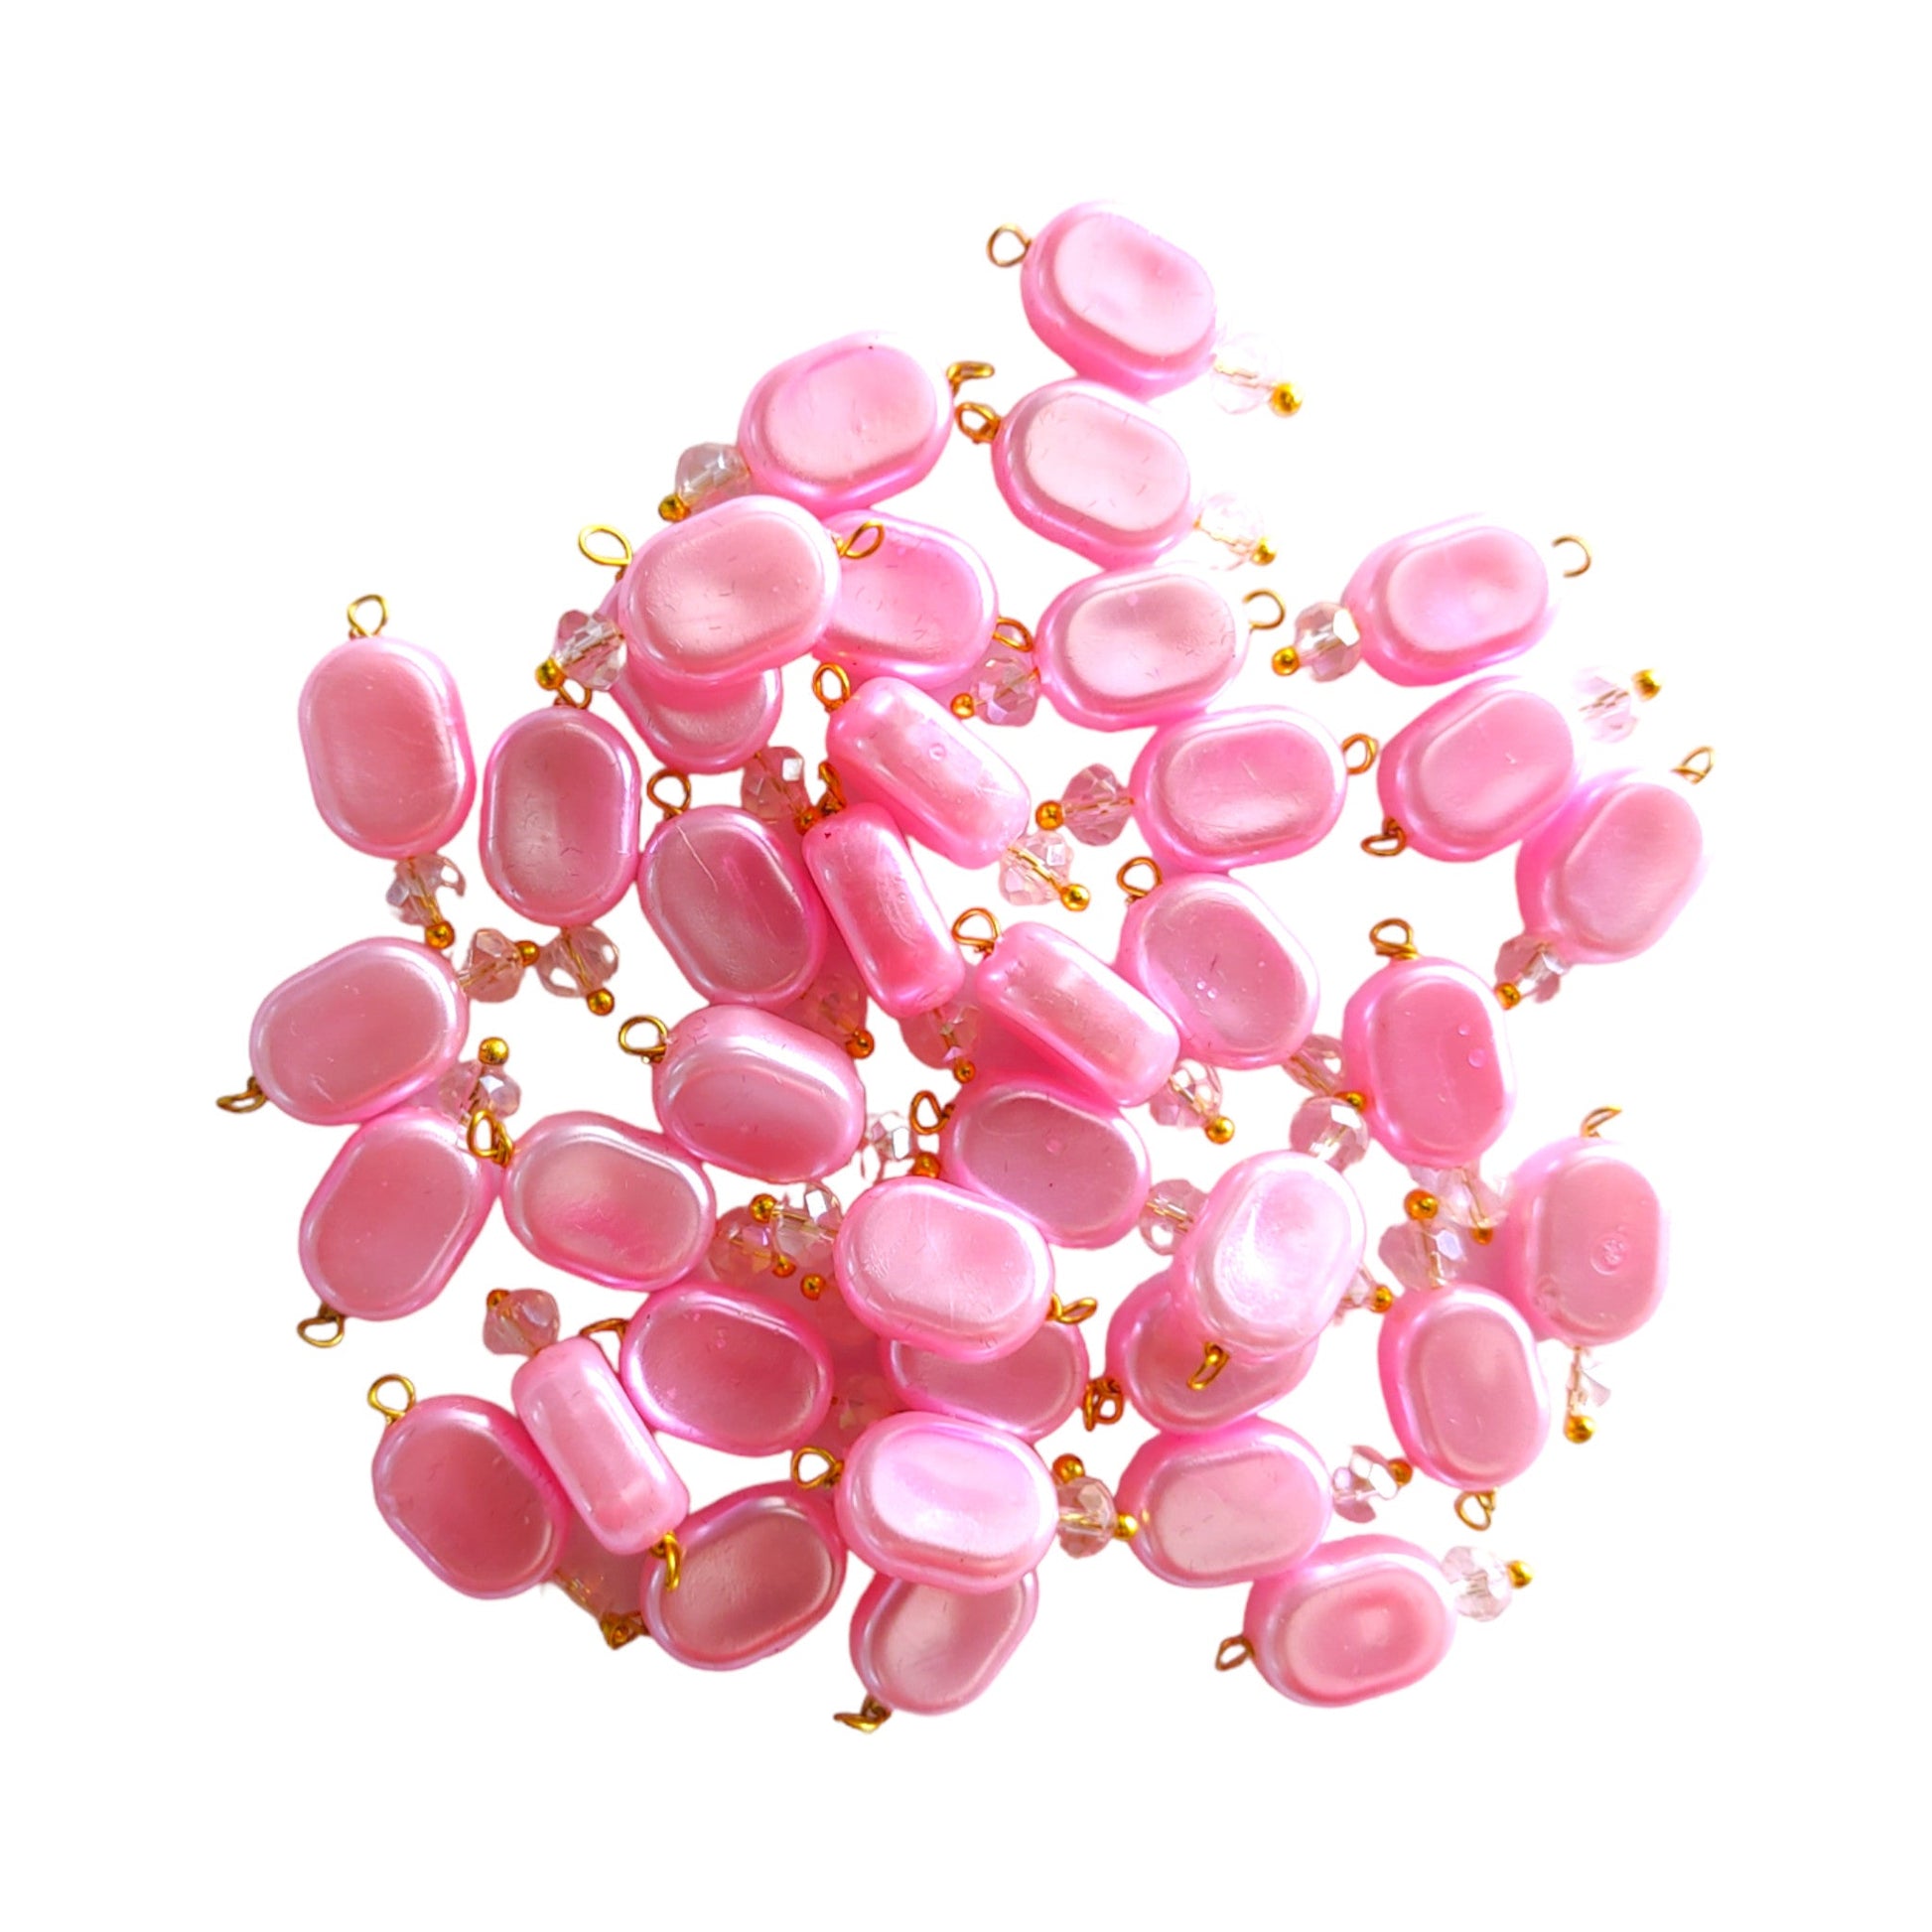 Indian Petals 100Pcs Colored Plastic Bead with Crystal Ball Drop for Craft Décor or Jewelry Making, 8x12mm, Light Pink